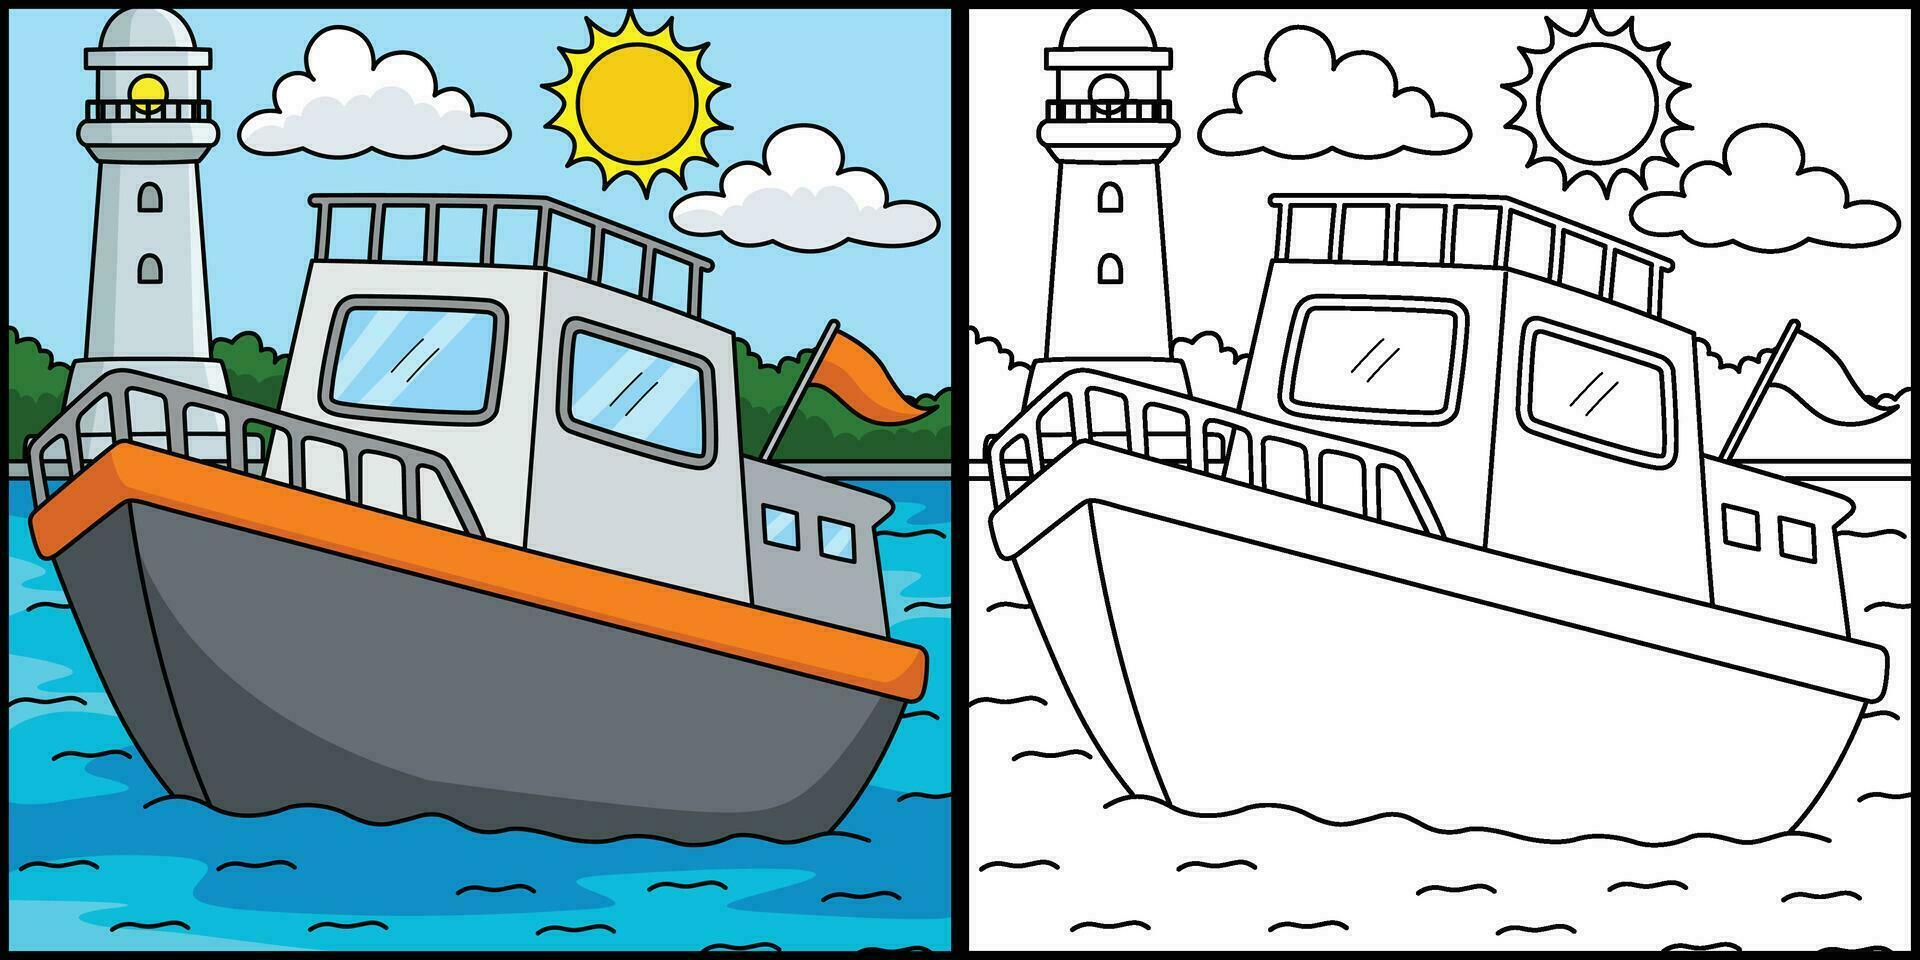 Yacht Summer Coloring Page Colored Illustration vector